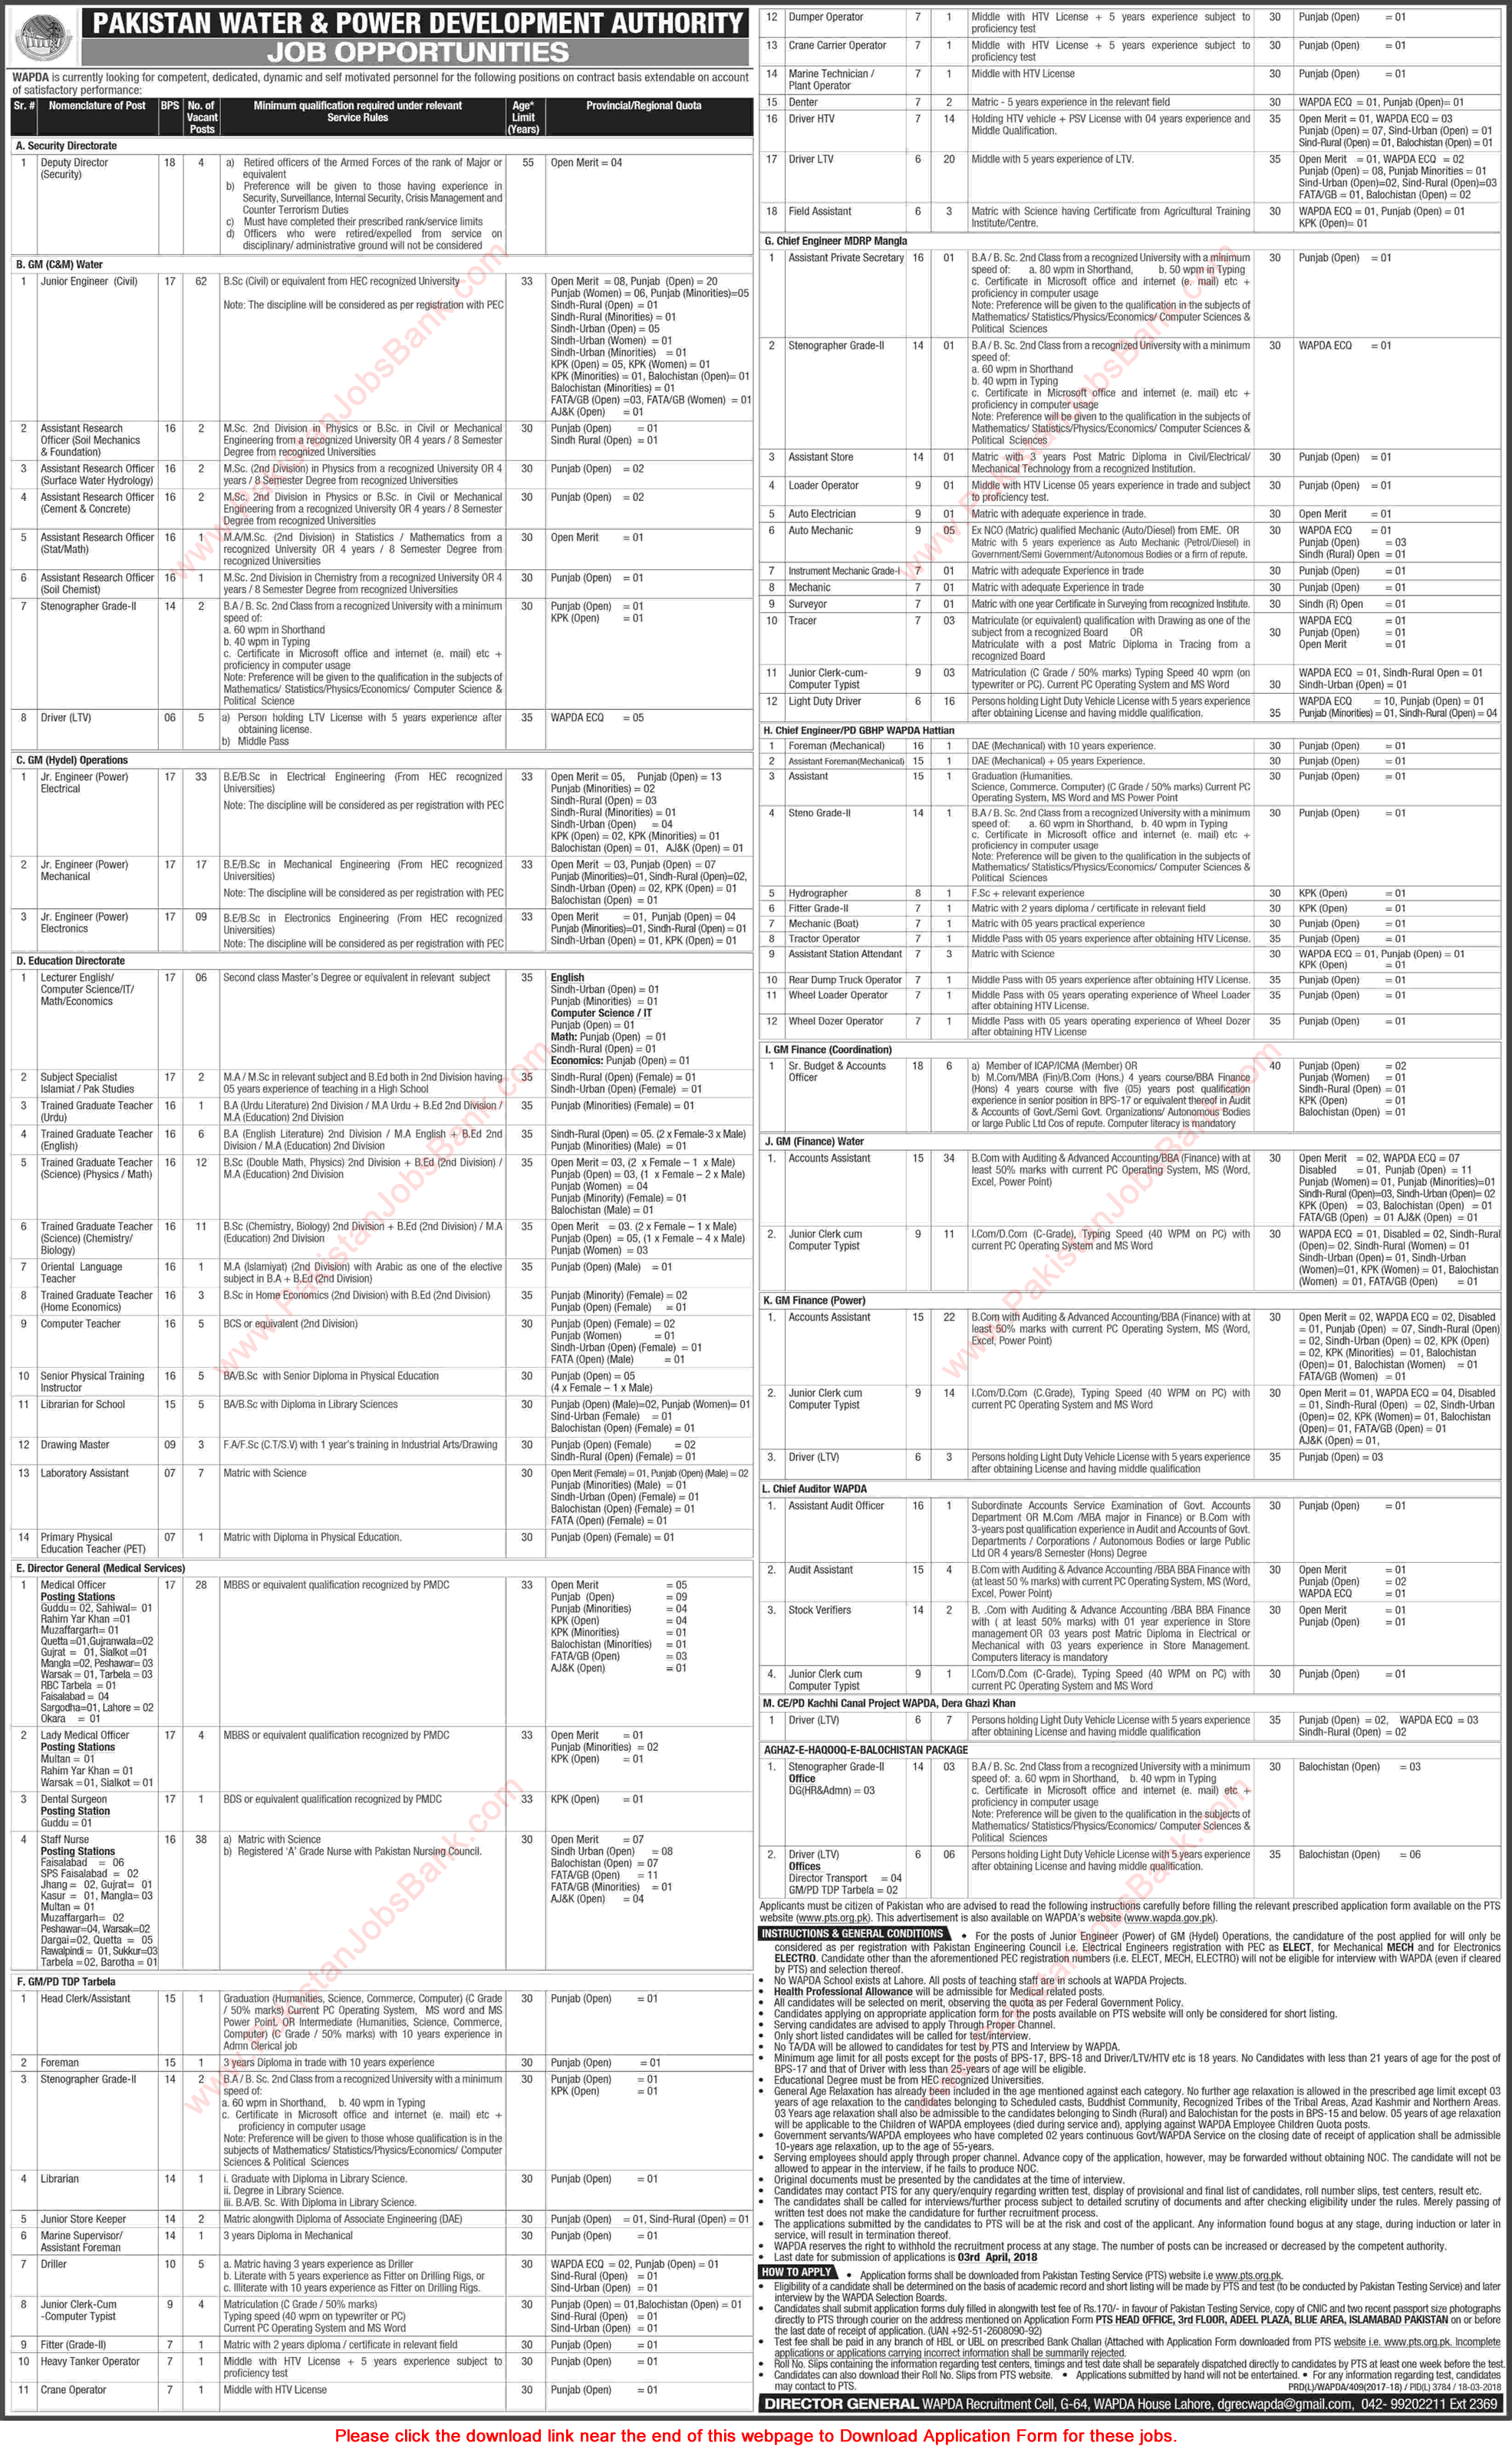 WAPDA Jobs March 2018 PTS Application Form Water and Power Development Authority Latest